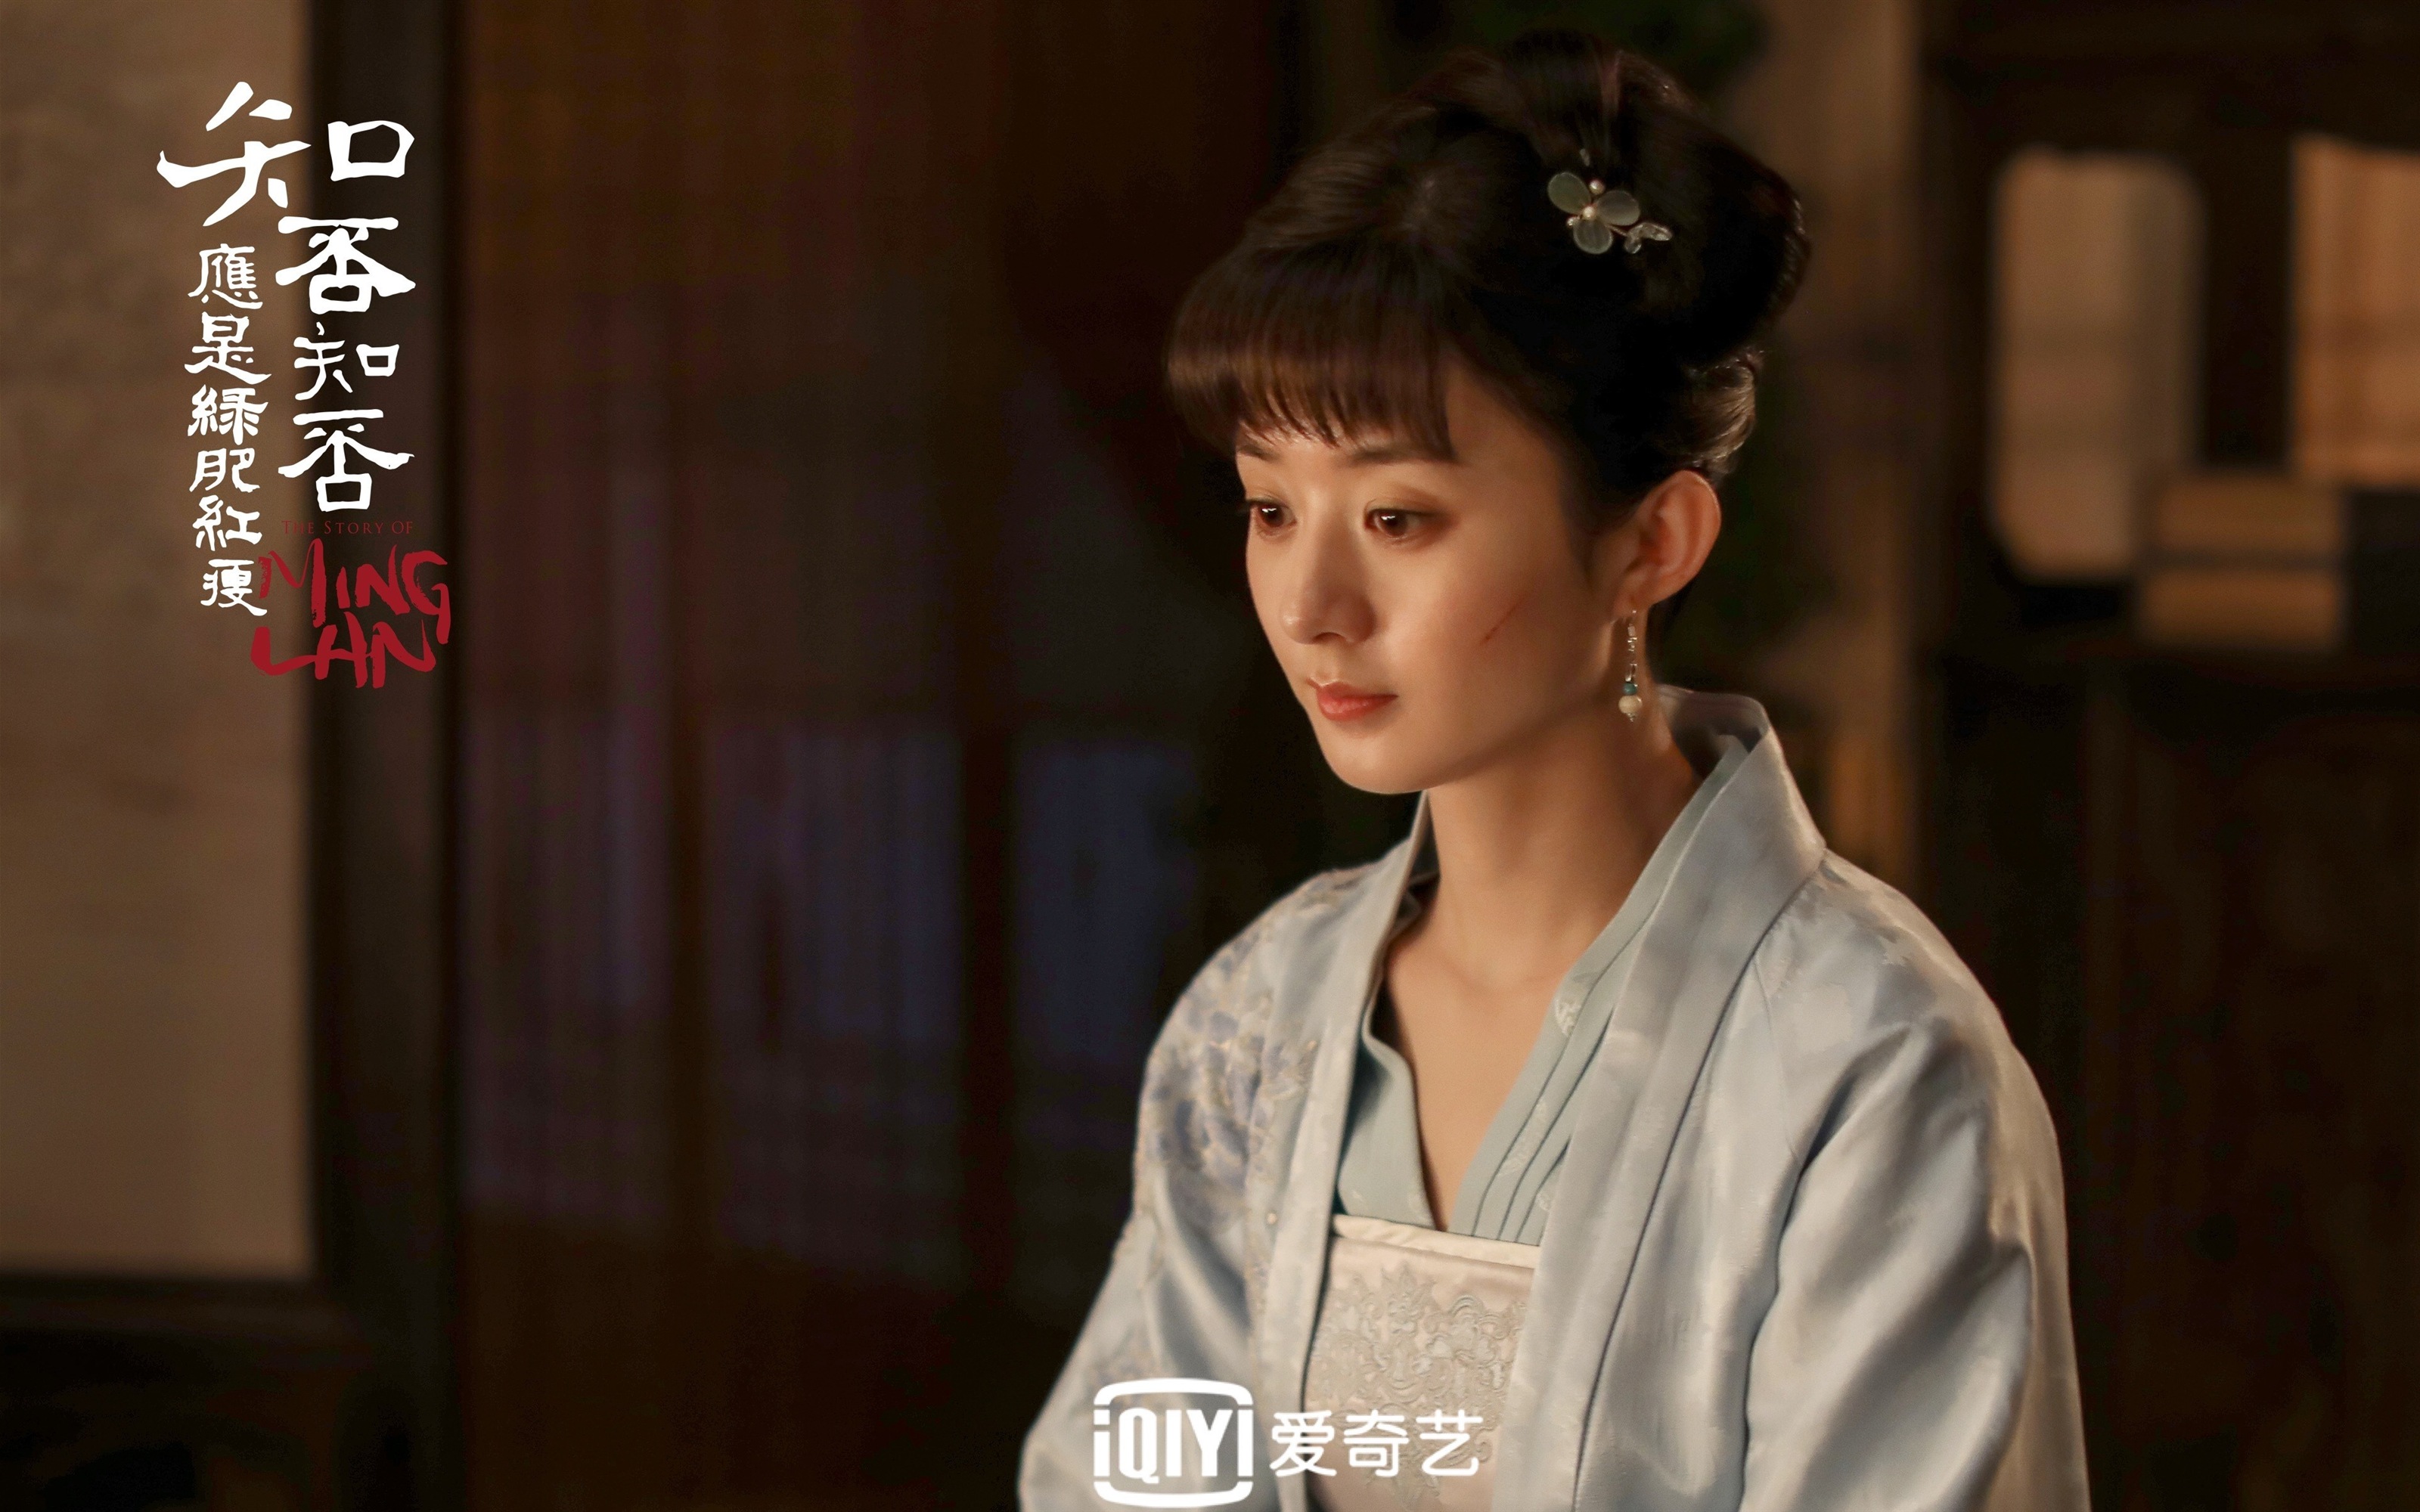 The Story Of MingLan, TV series HD wallpapers #36 - 3200x2000